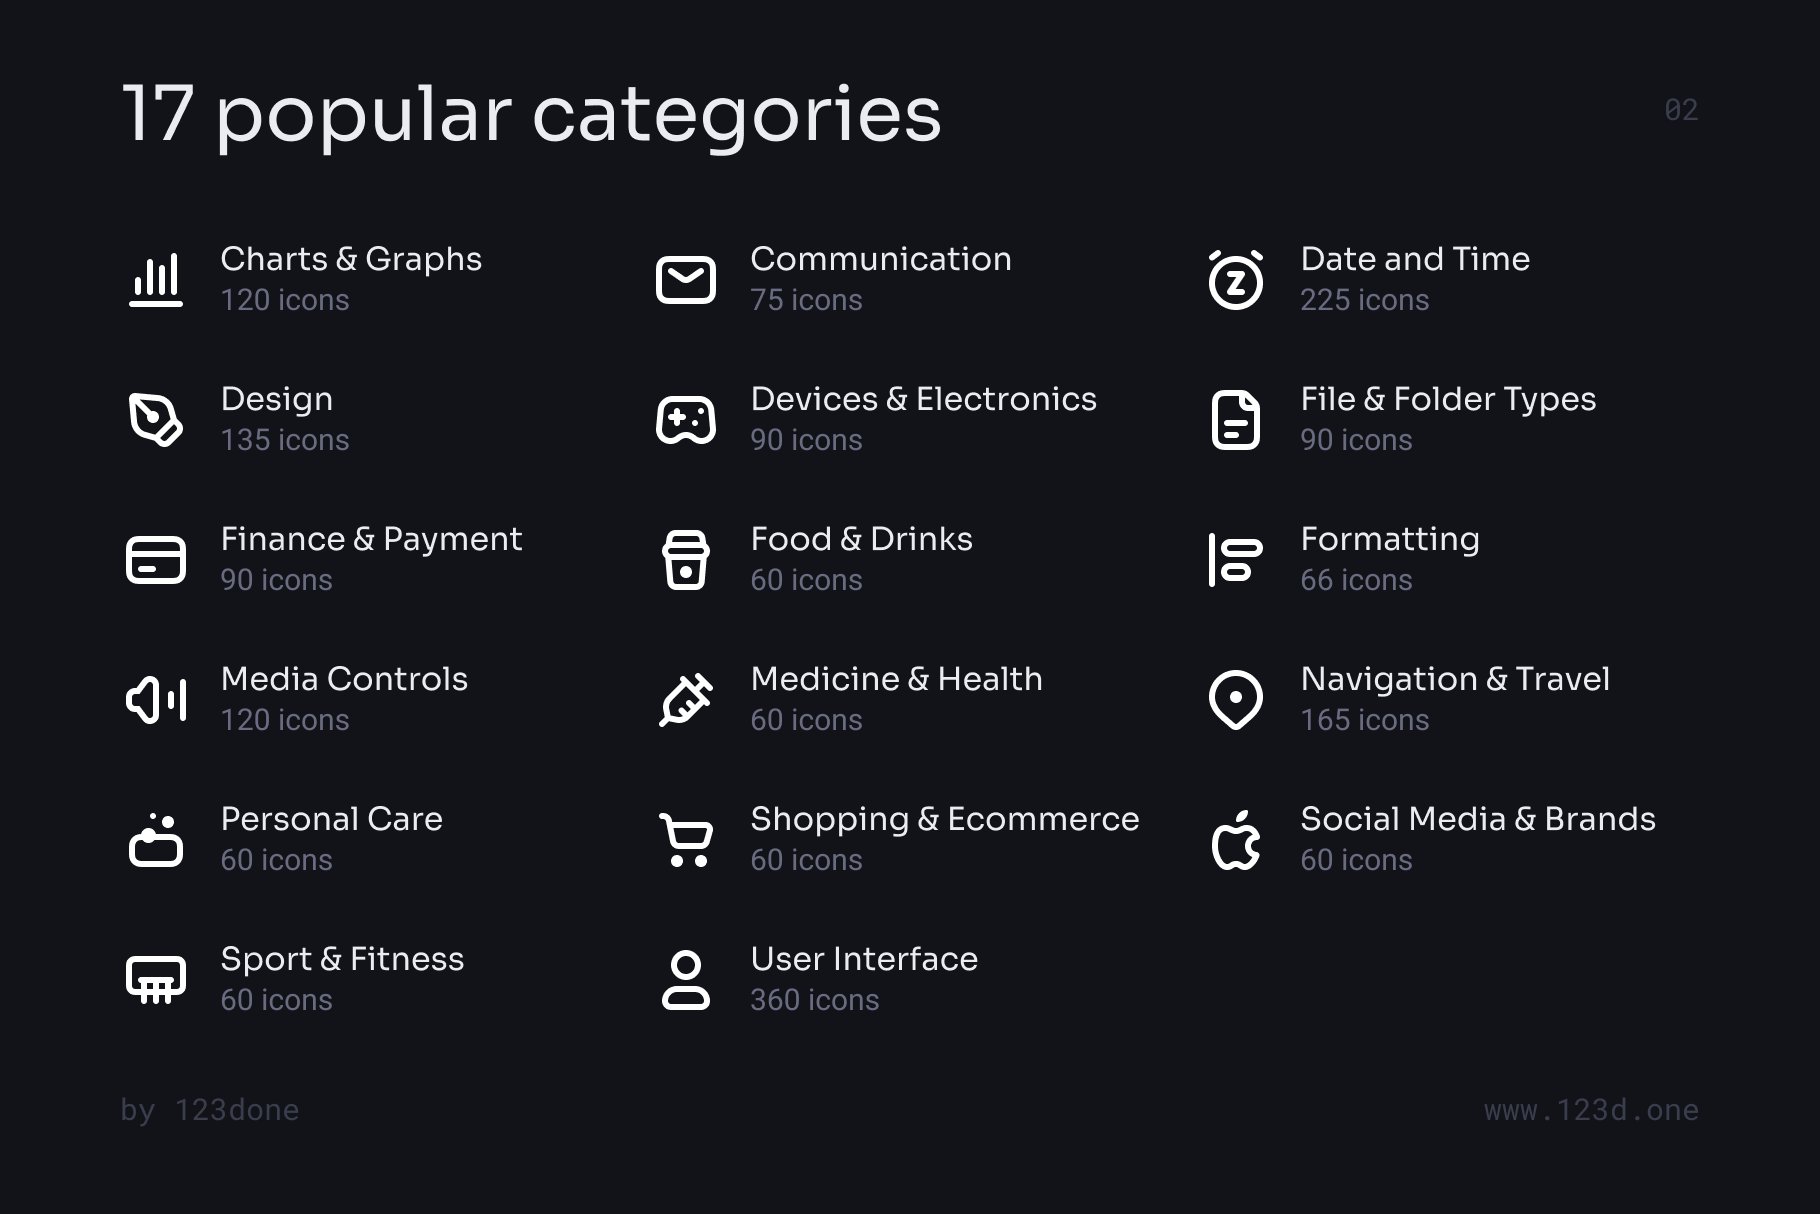 Popular categories of the Universal icon set.